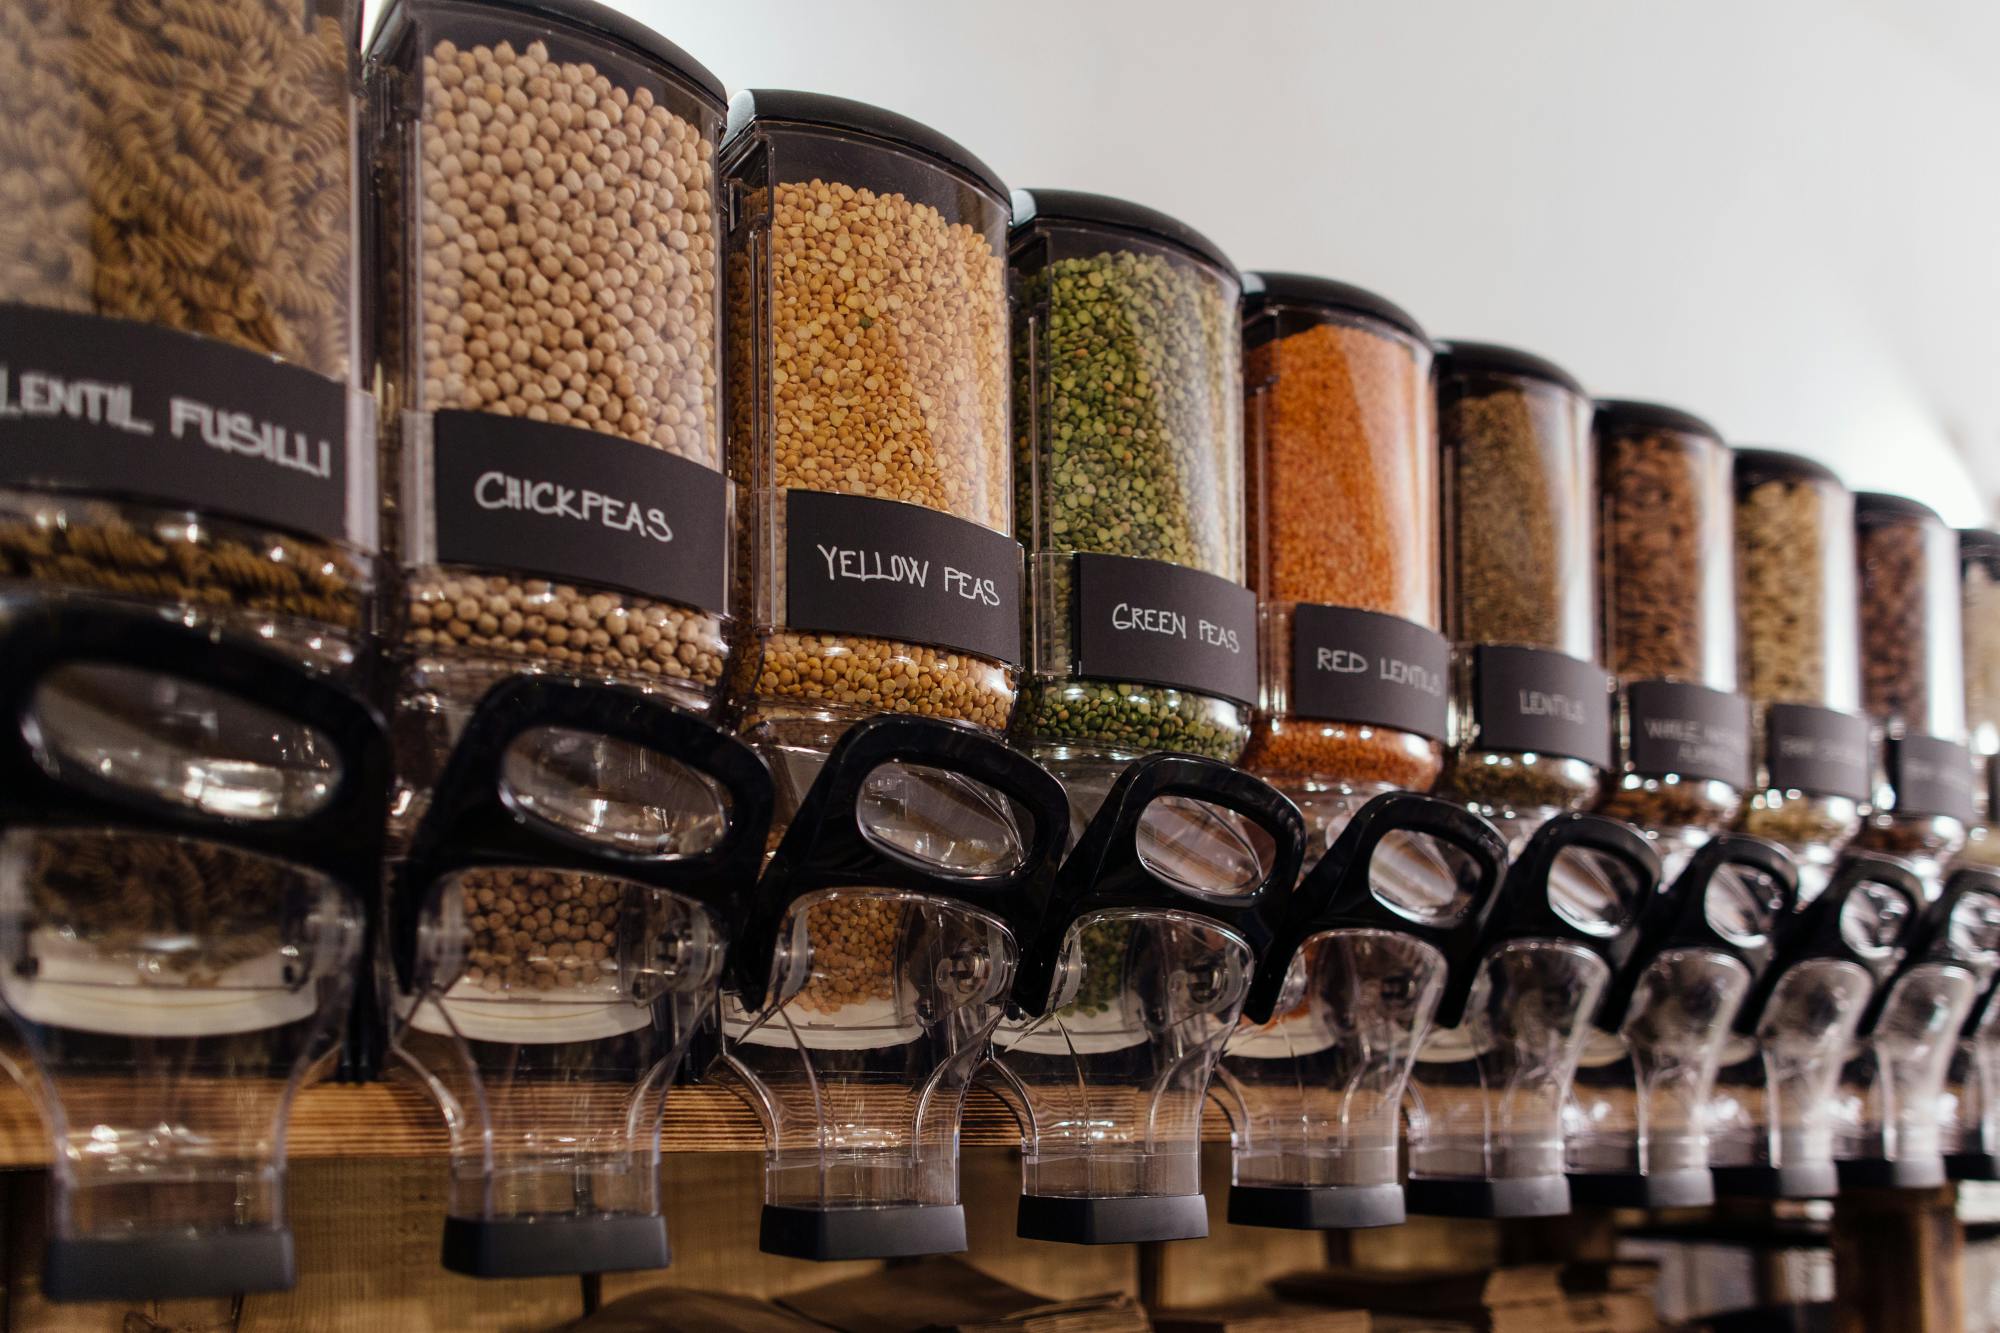 Row of clear dispensors containing cereals and grains